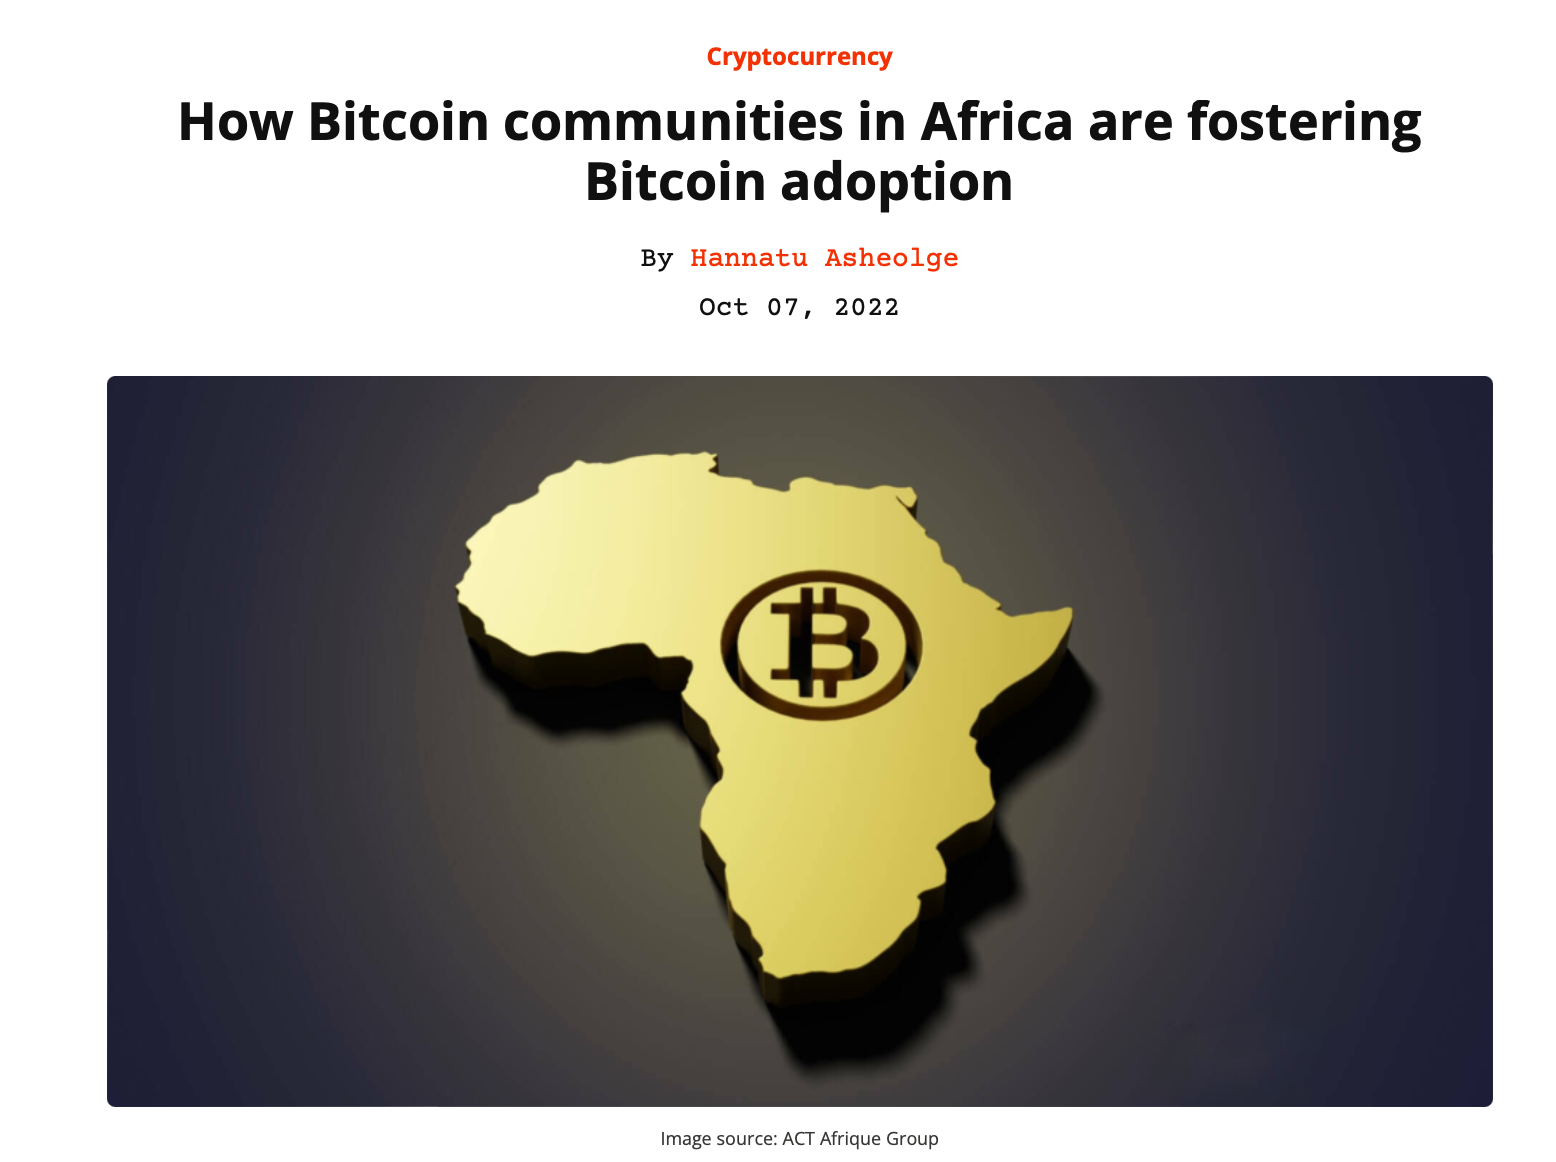 How Bitcoin communities in Africa are fostering Bitcoin adoption